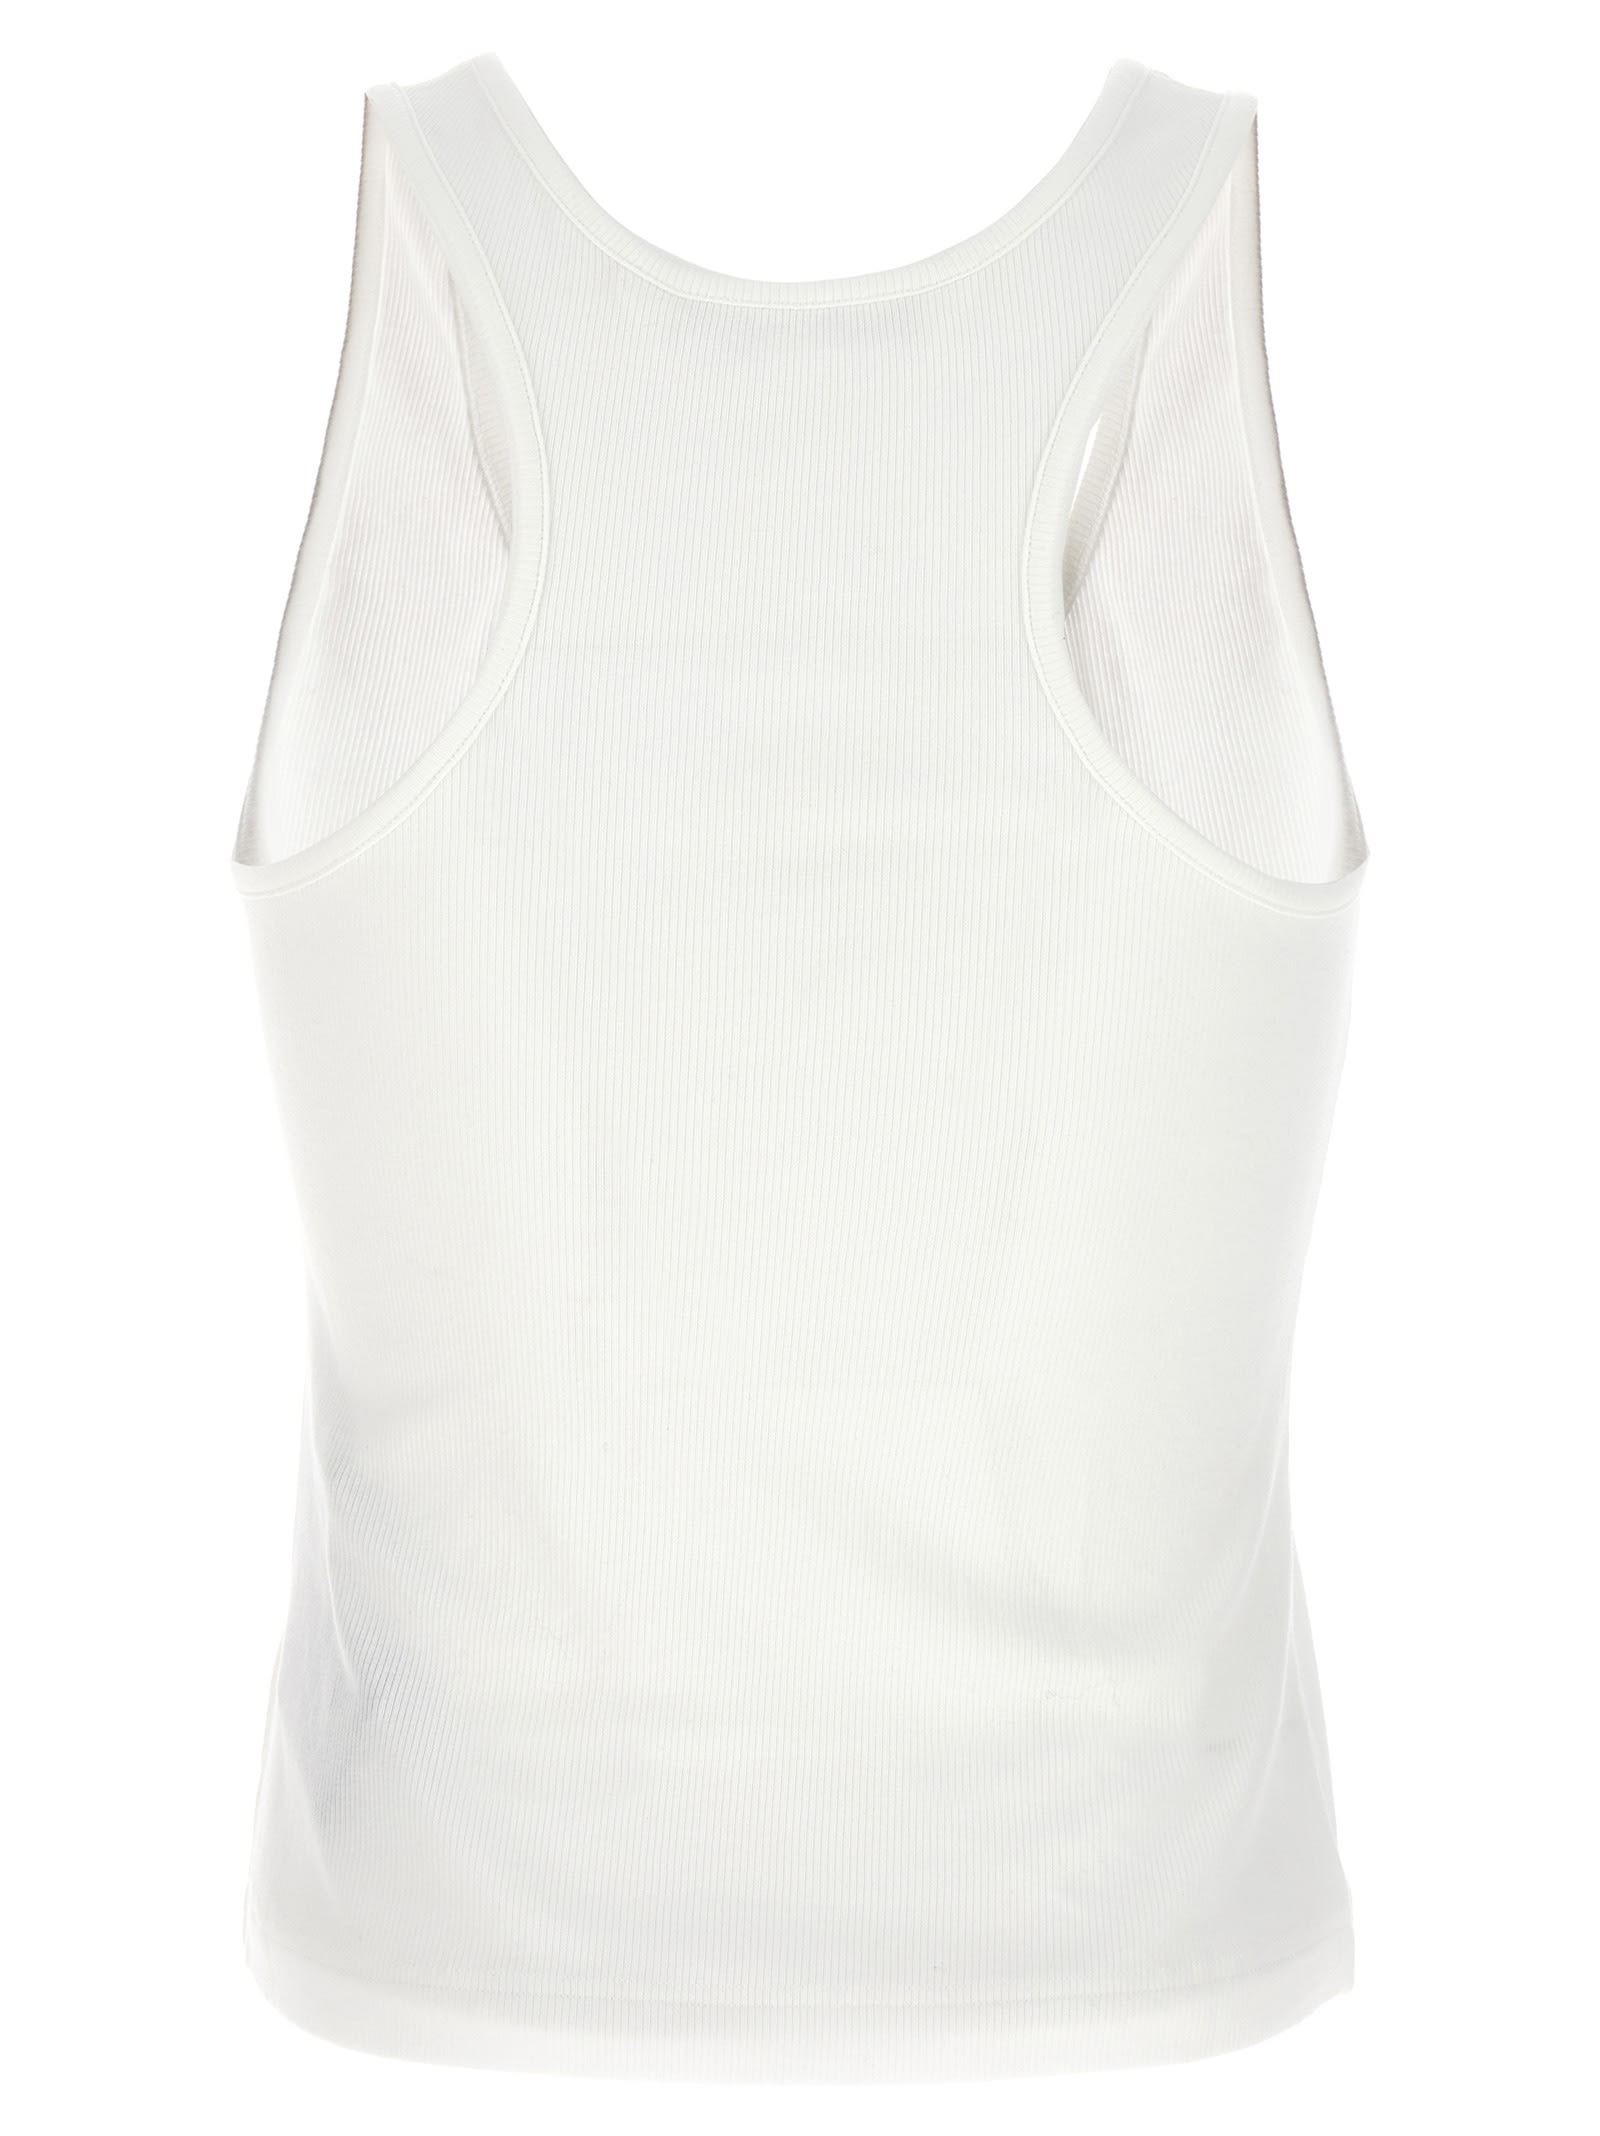 Shop Palm Angels Logo Top In Bianco